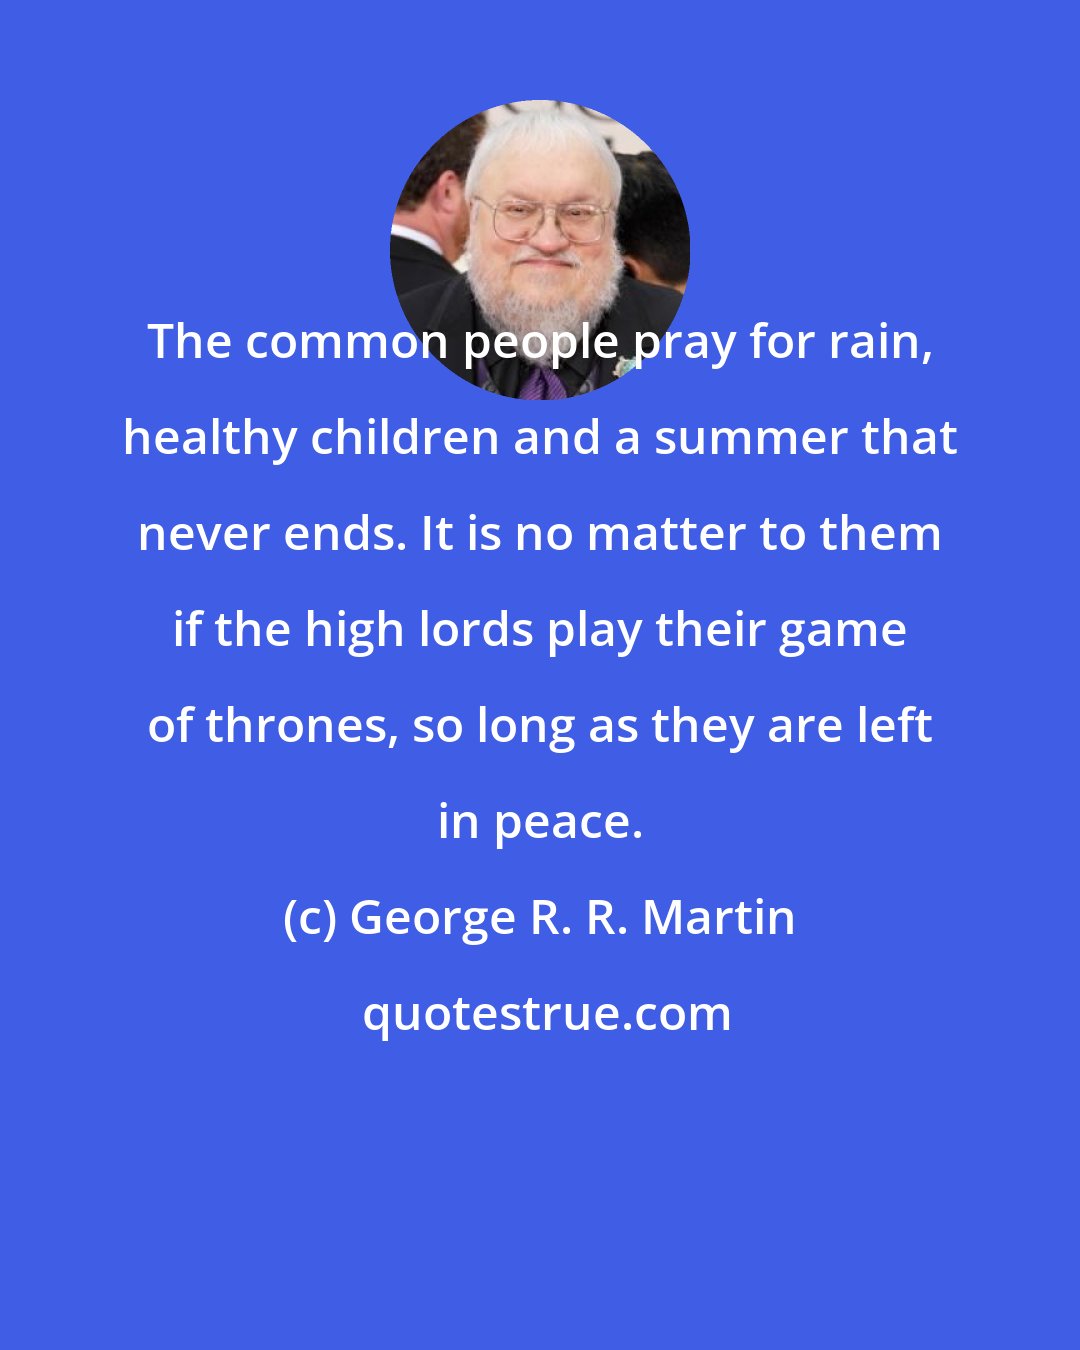 George R. R. Martin: The common people pray for rain, healthy children and a summer that never ends. It is no matter to them if the high lords play their game of thrones, so long as they are left in peace.